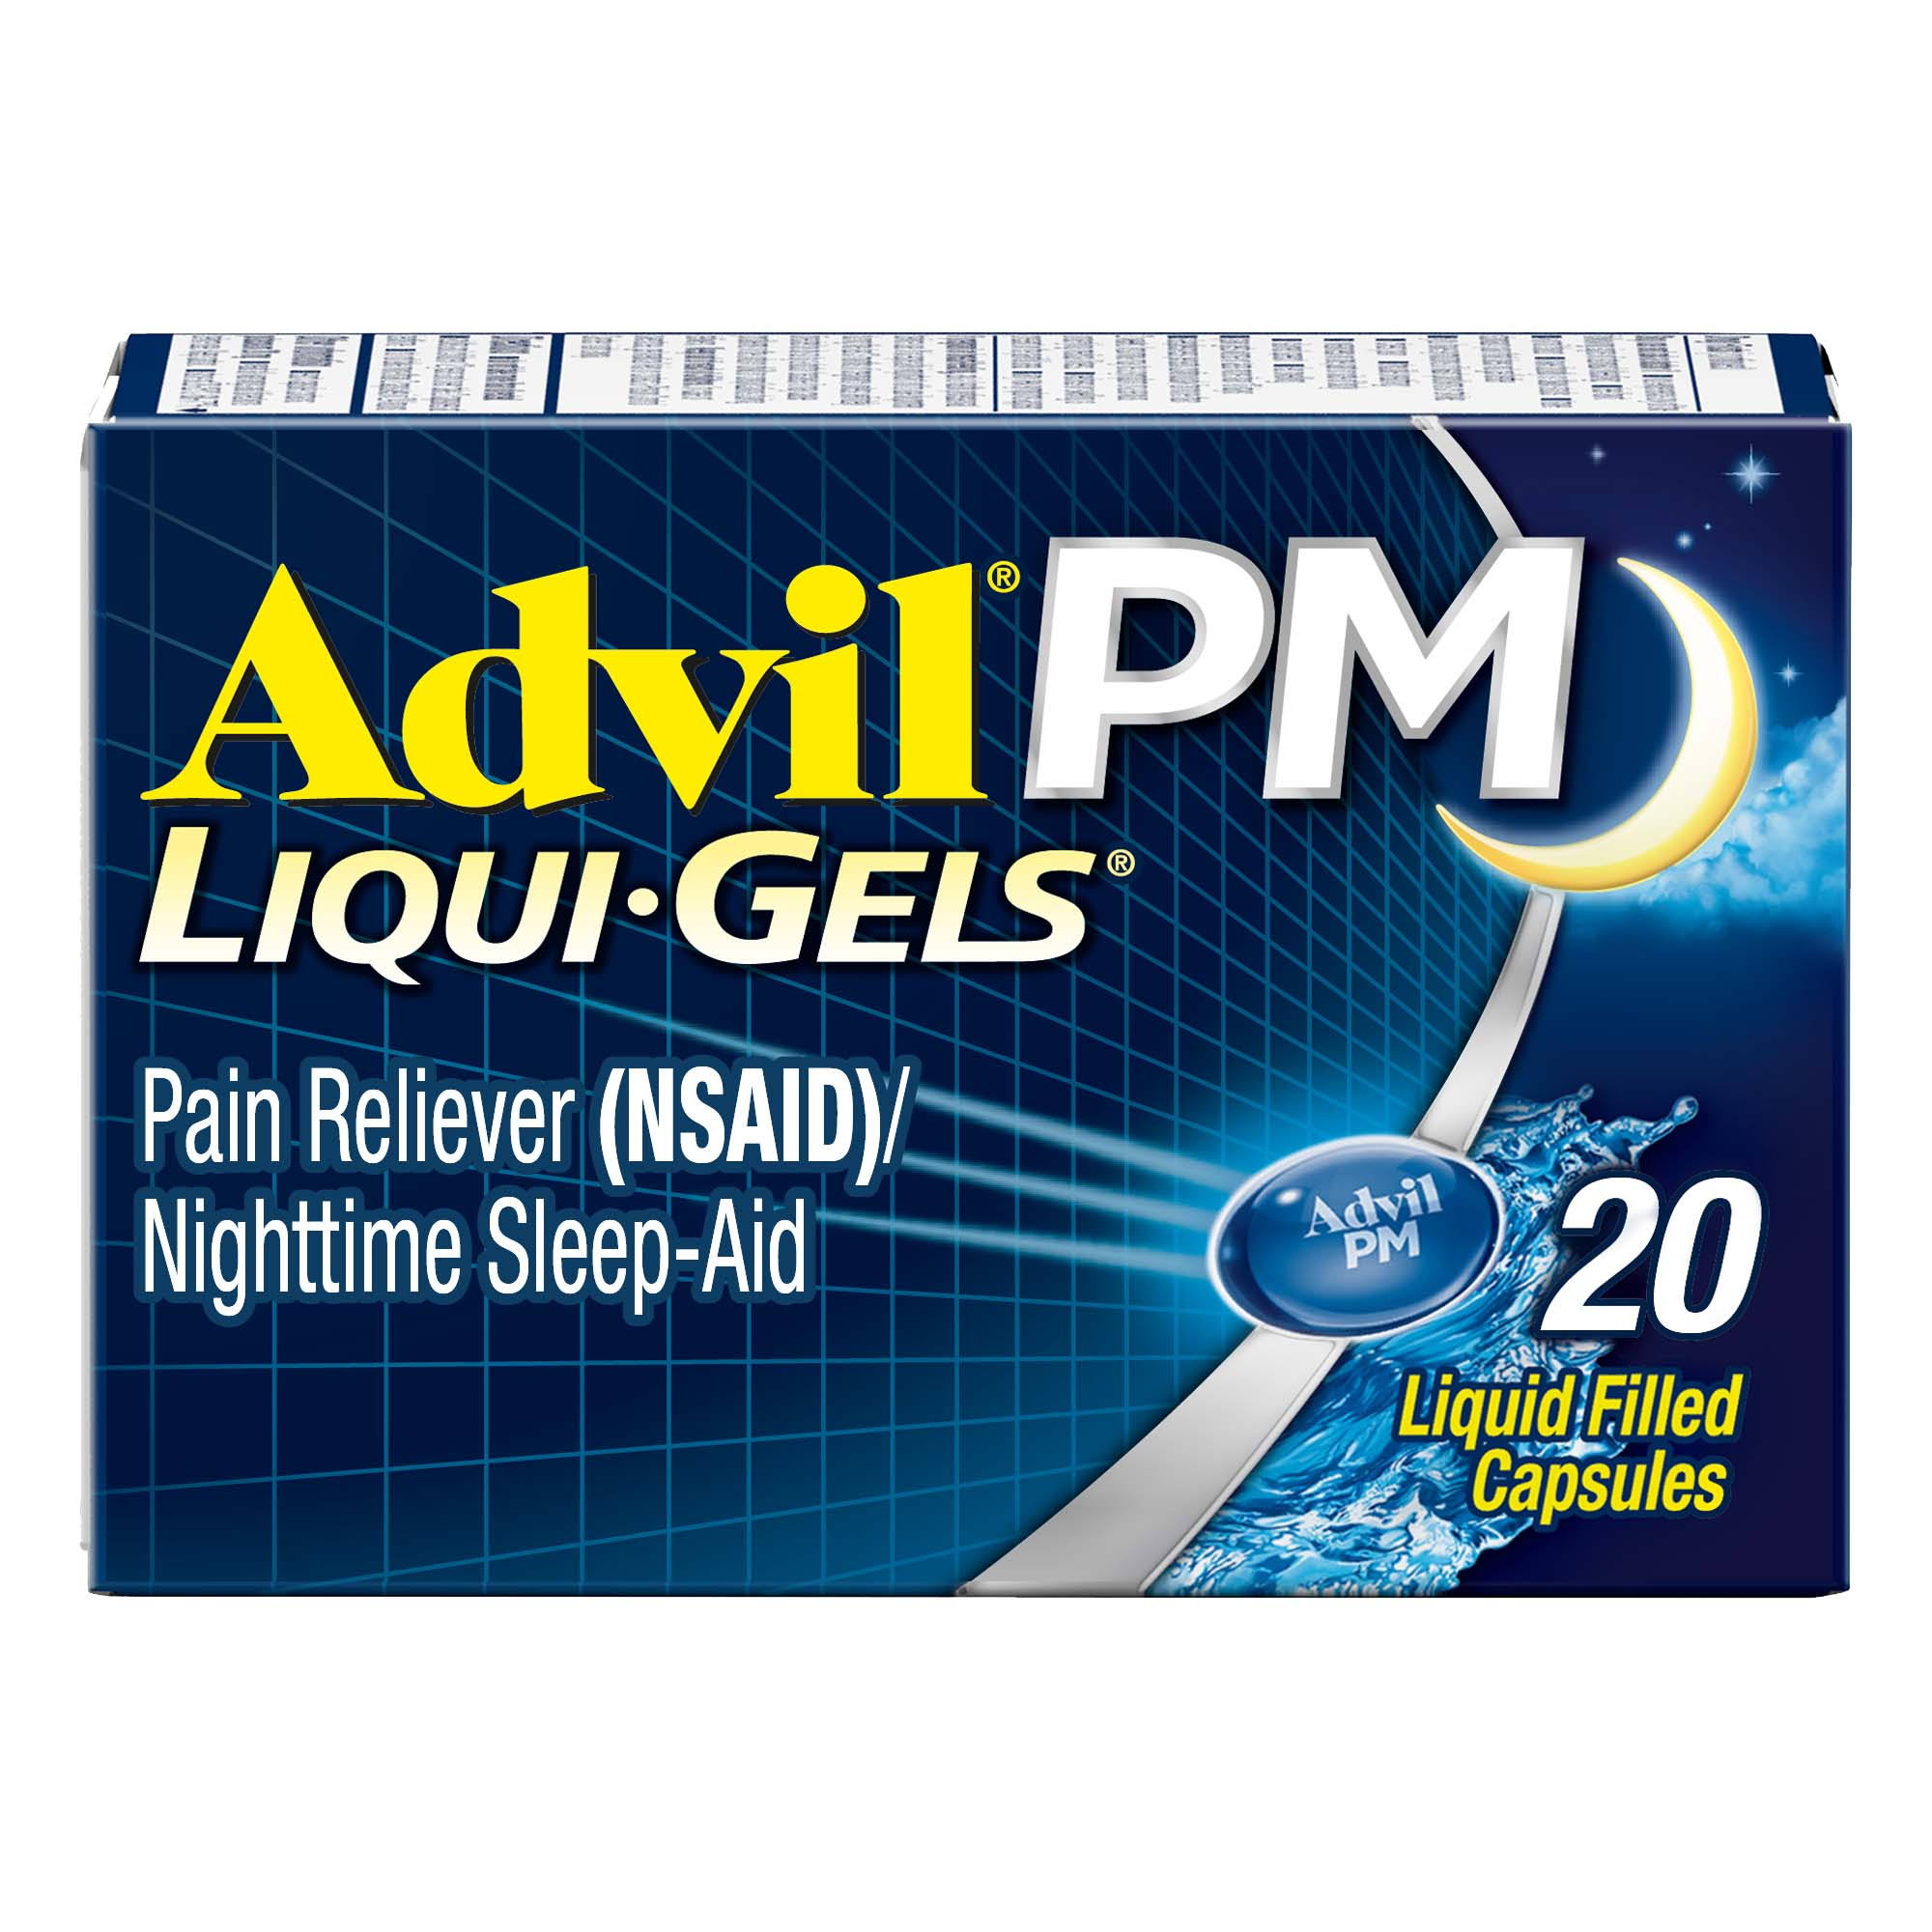 Advil PM Liqui Gels Pain Relief and Nighttime Sleep Aid Capsules - 20ct